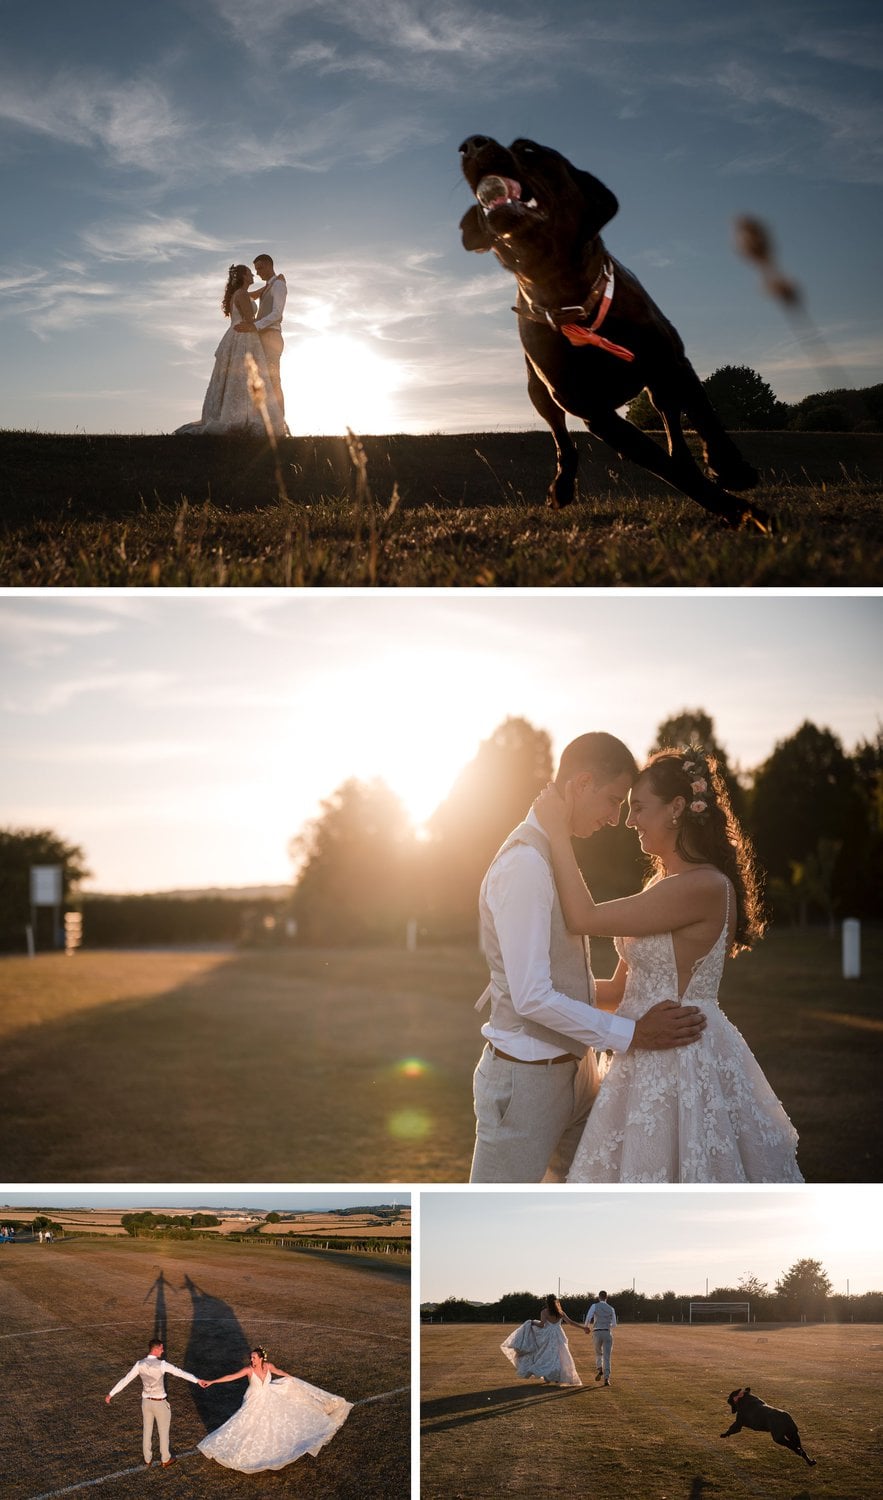 Fun with a dog during golden hour wedding portraits